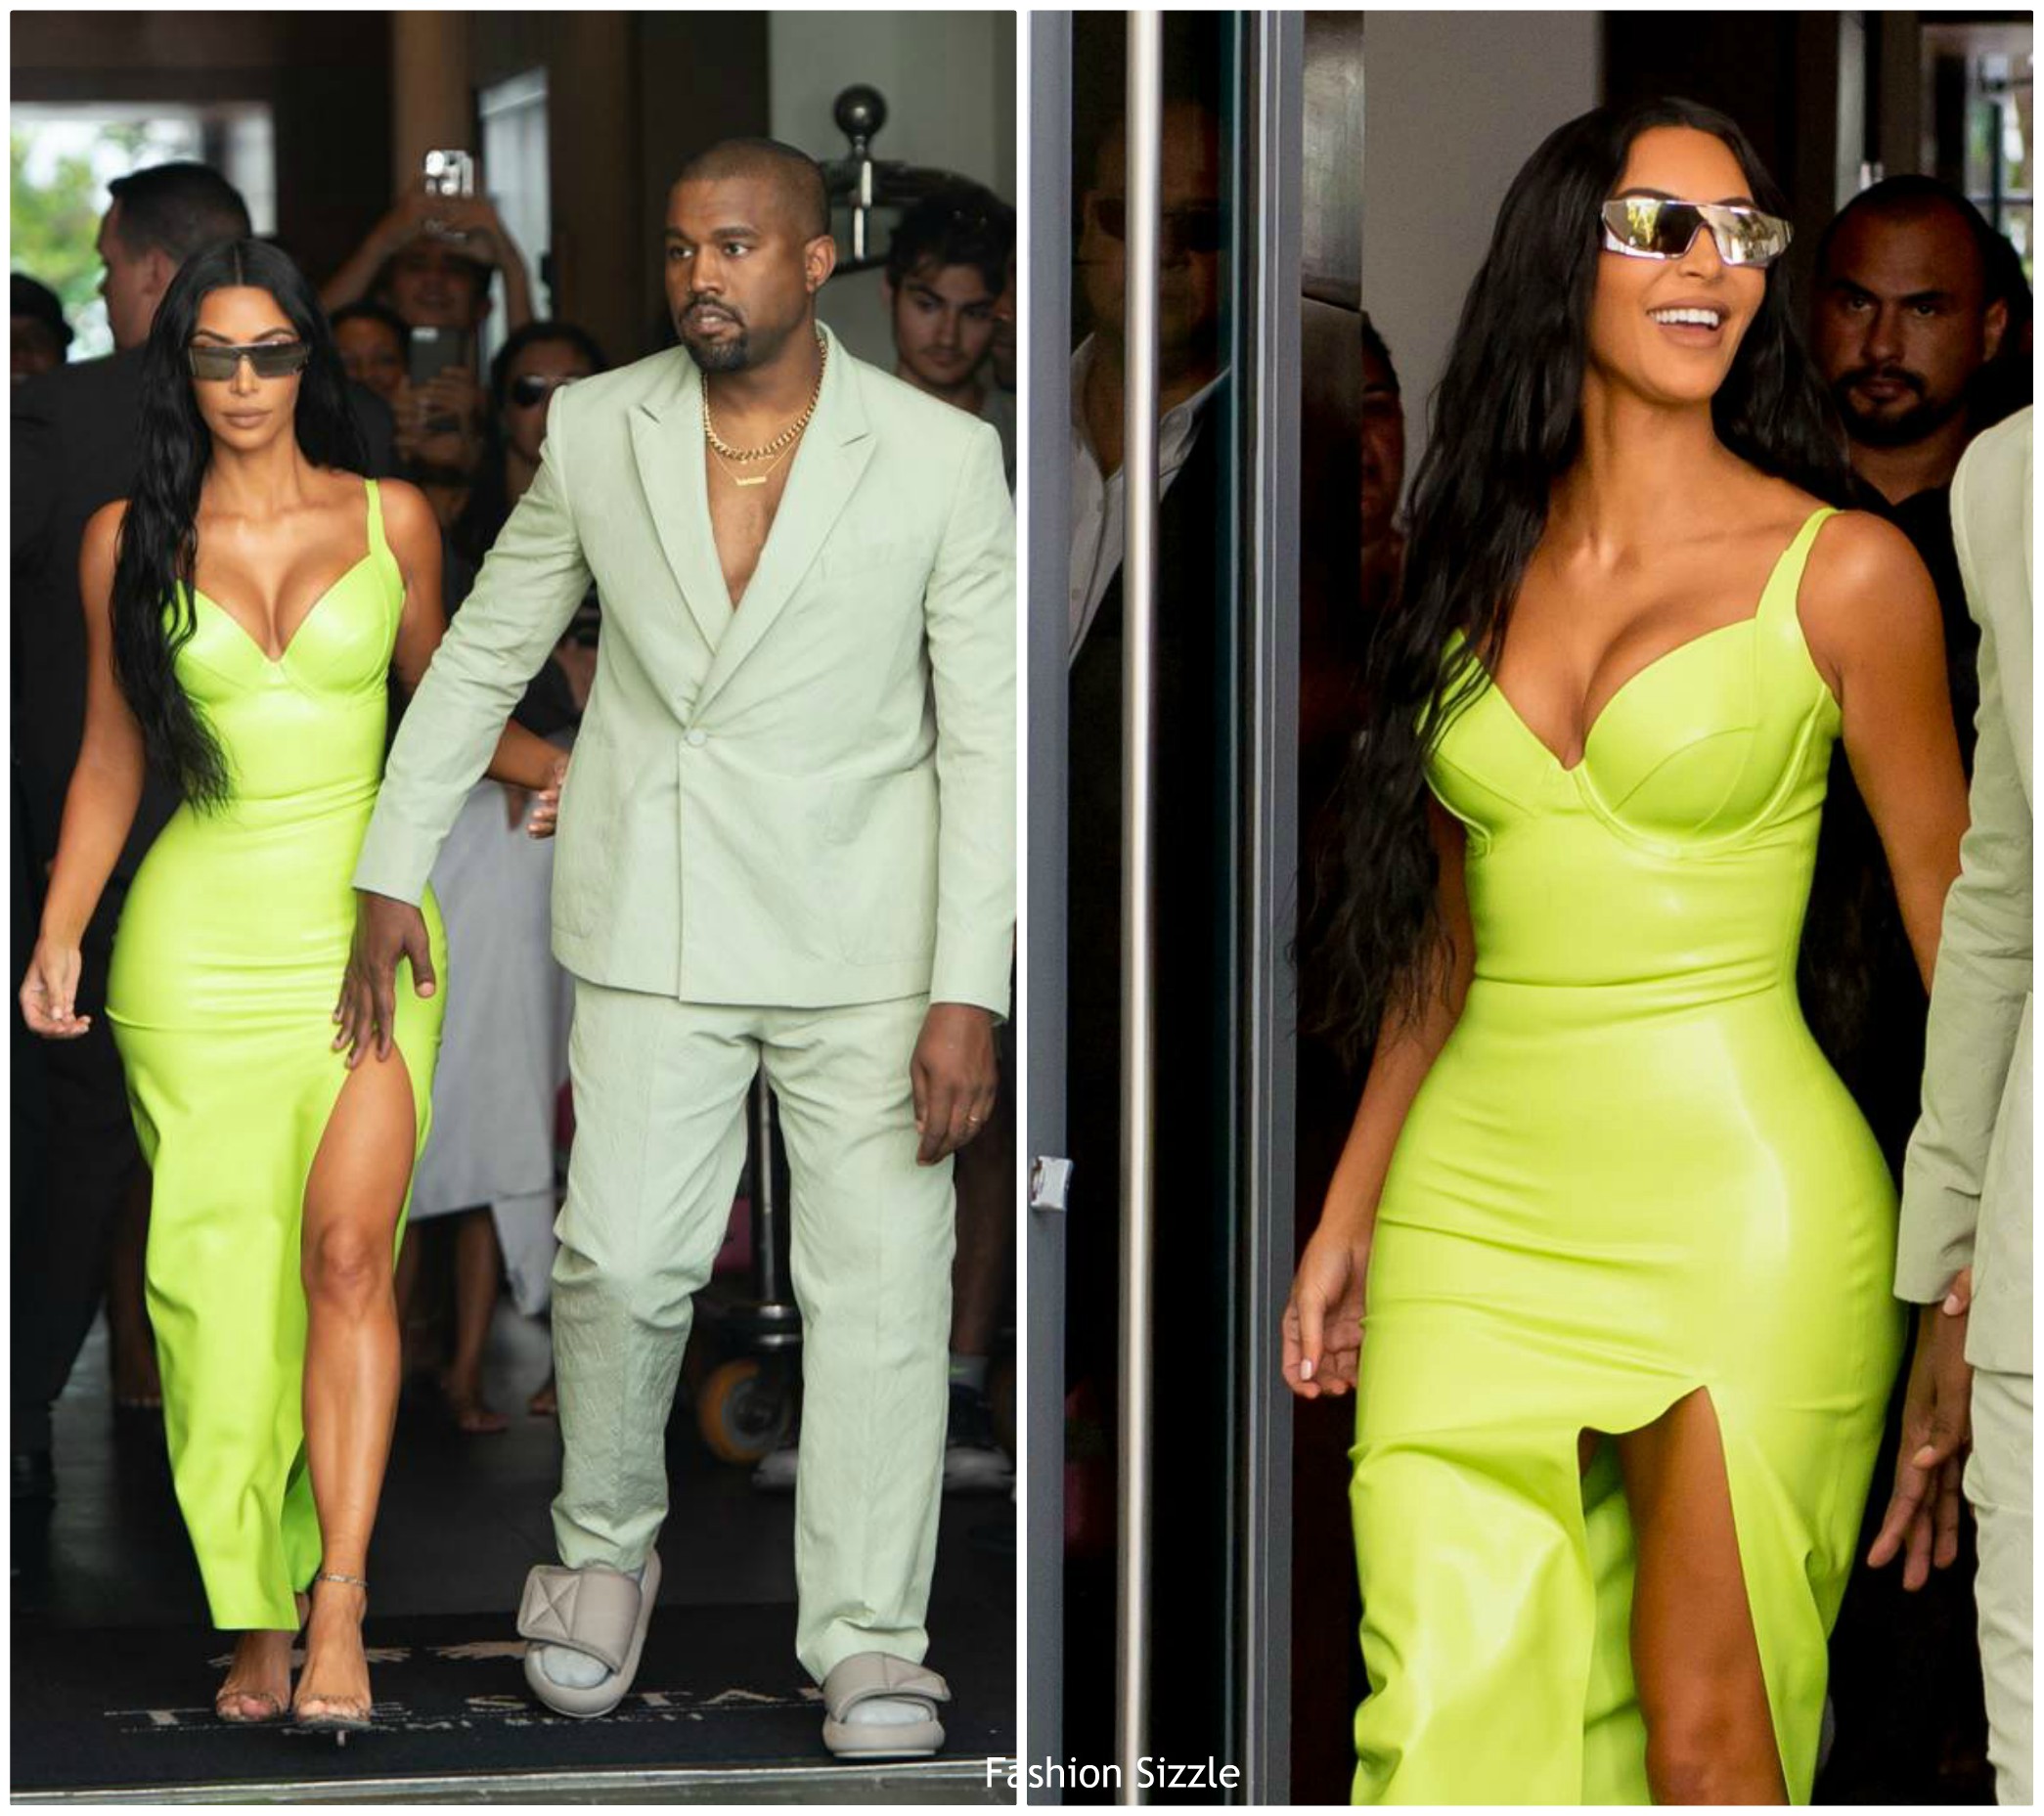 Kanye West Nails Summer In Louis Vuitton Suit & Yeezy Slides